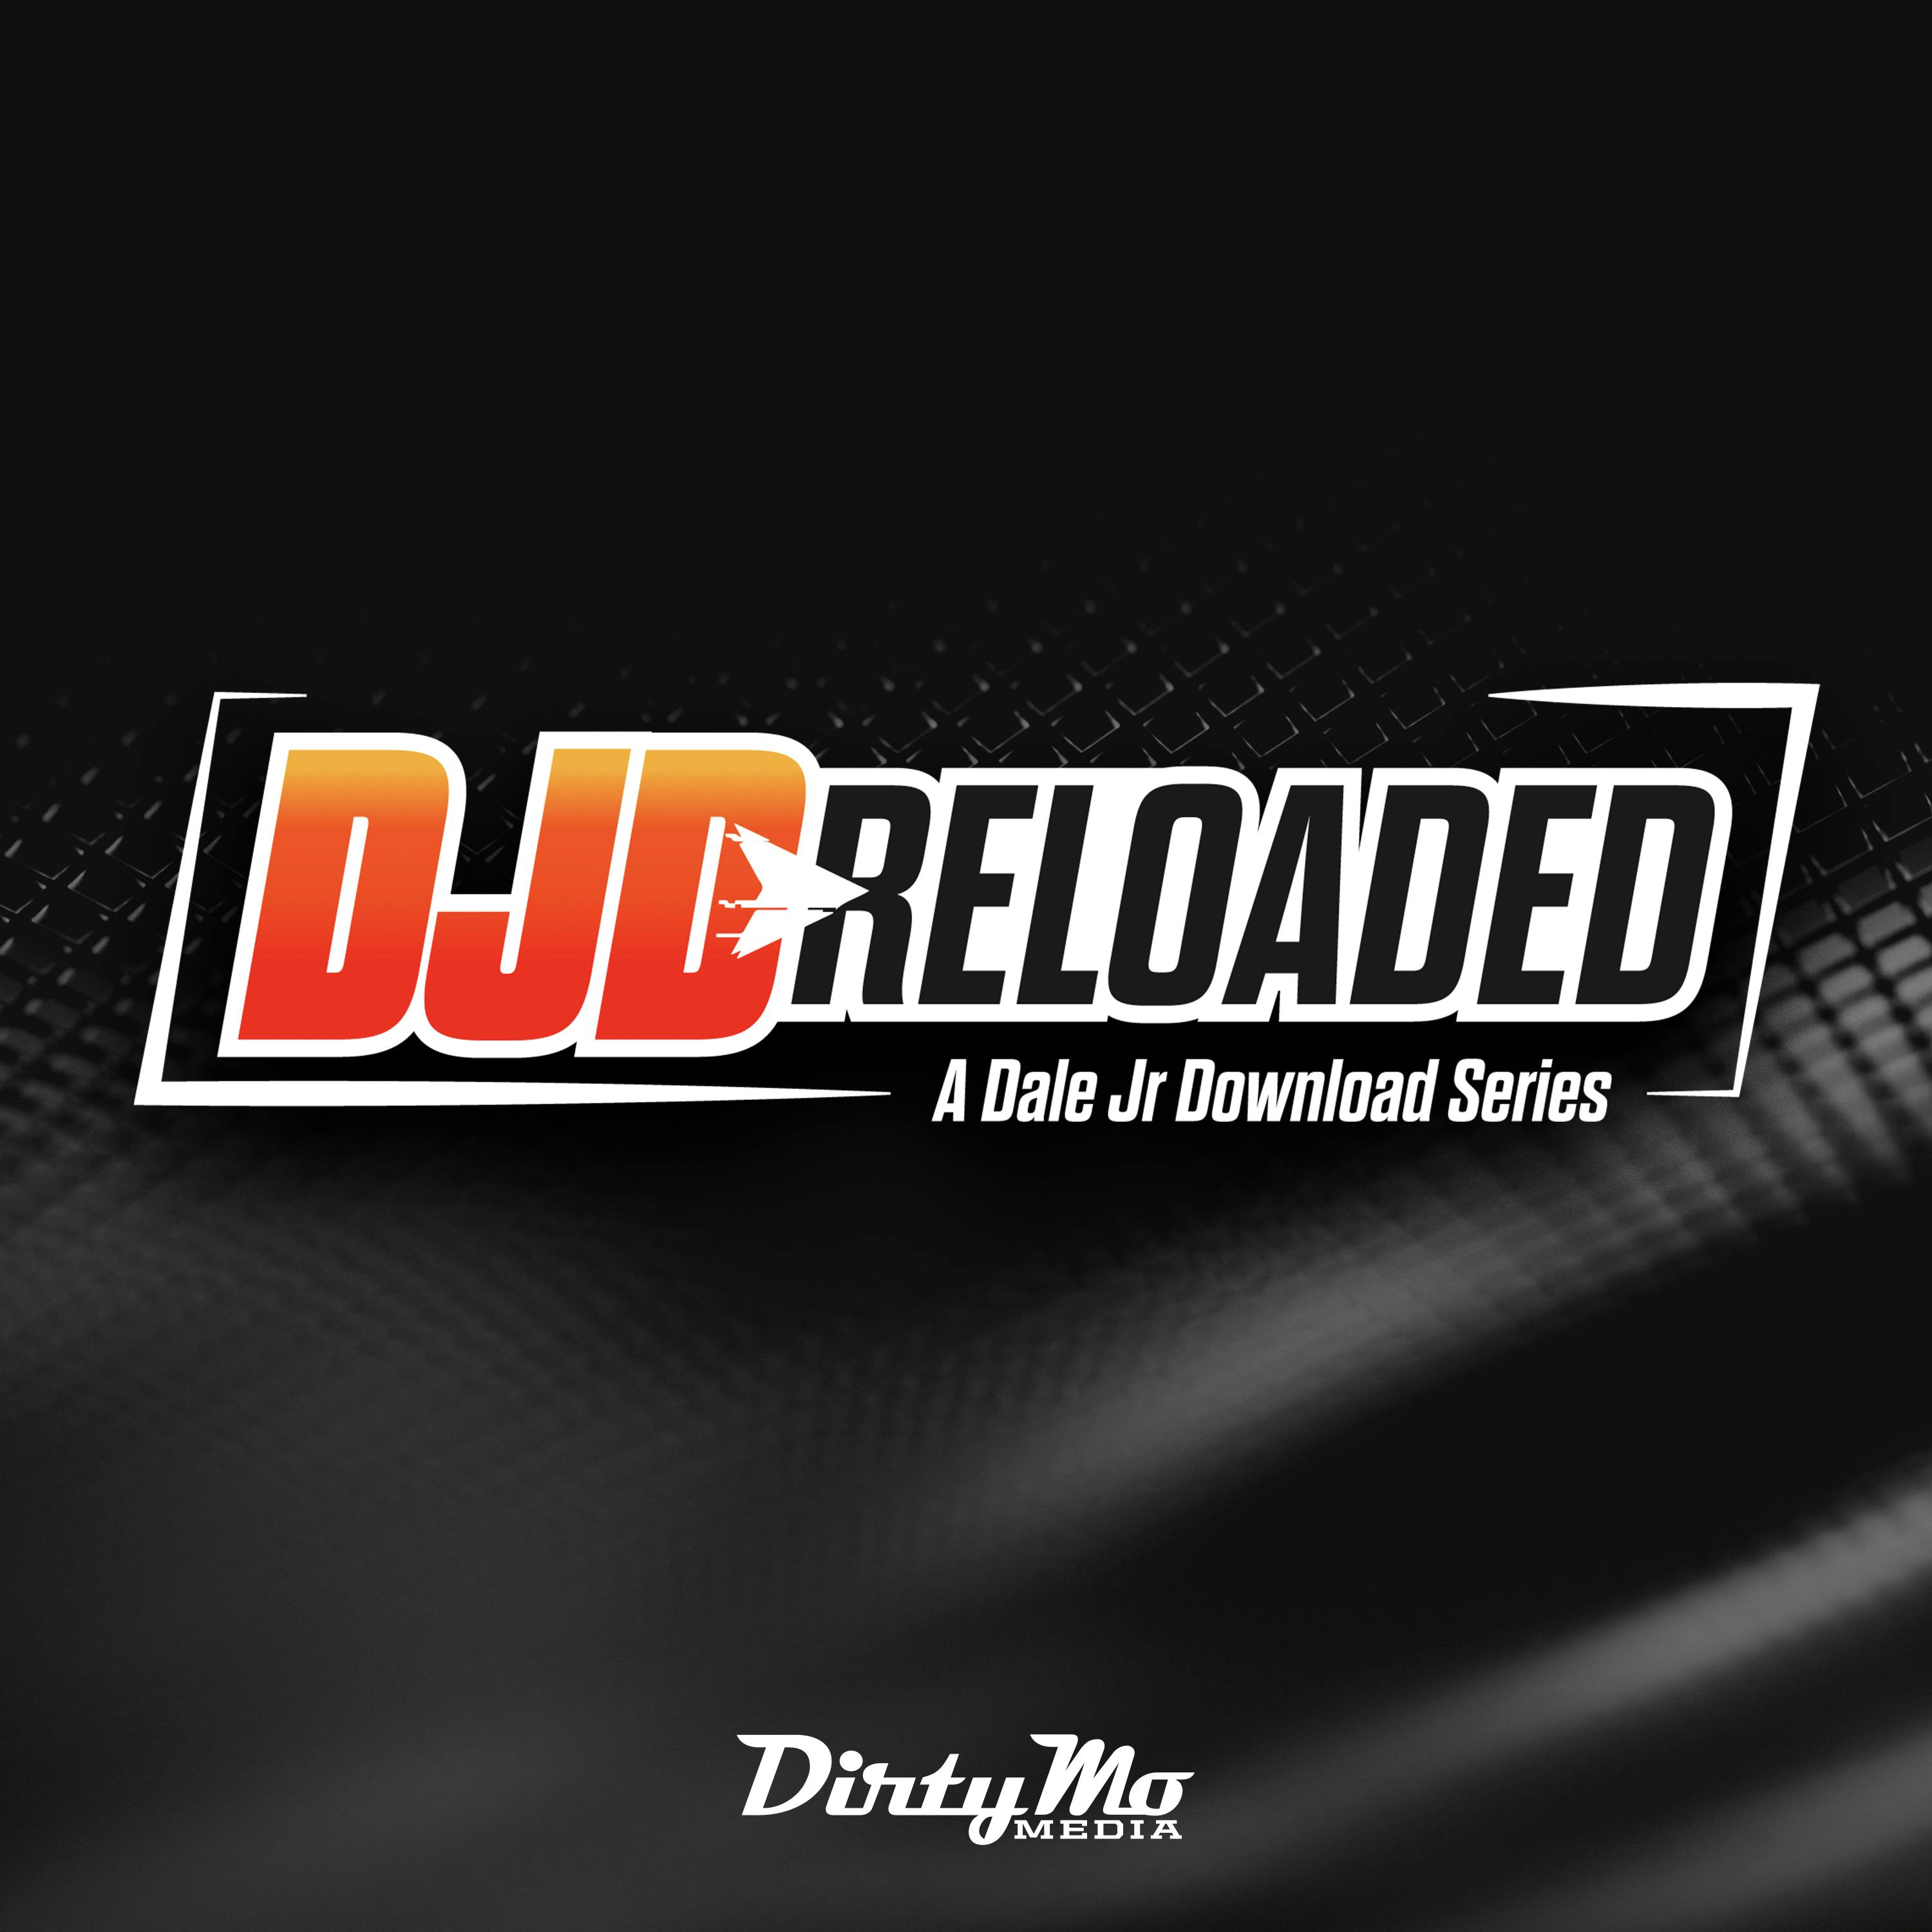 DJD Reloaded - Classic Driver Conflicts & Finally Calling Keller